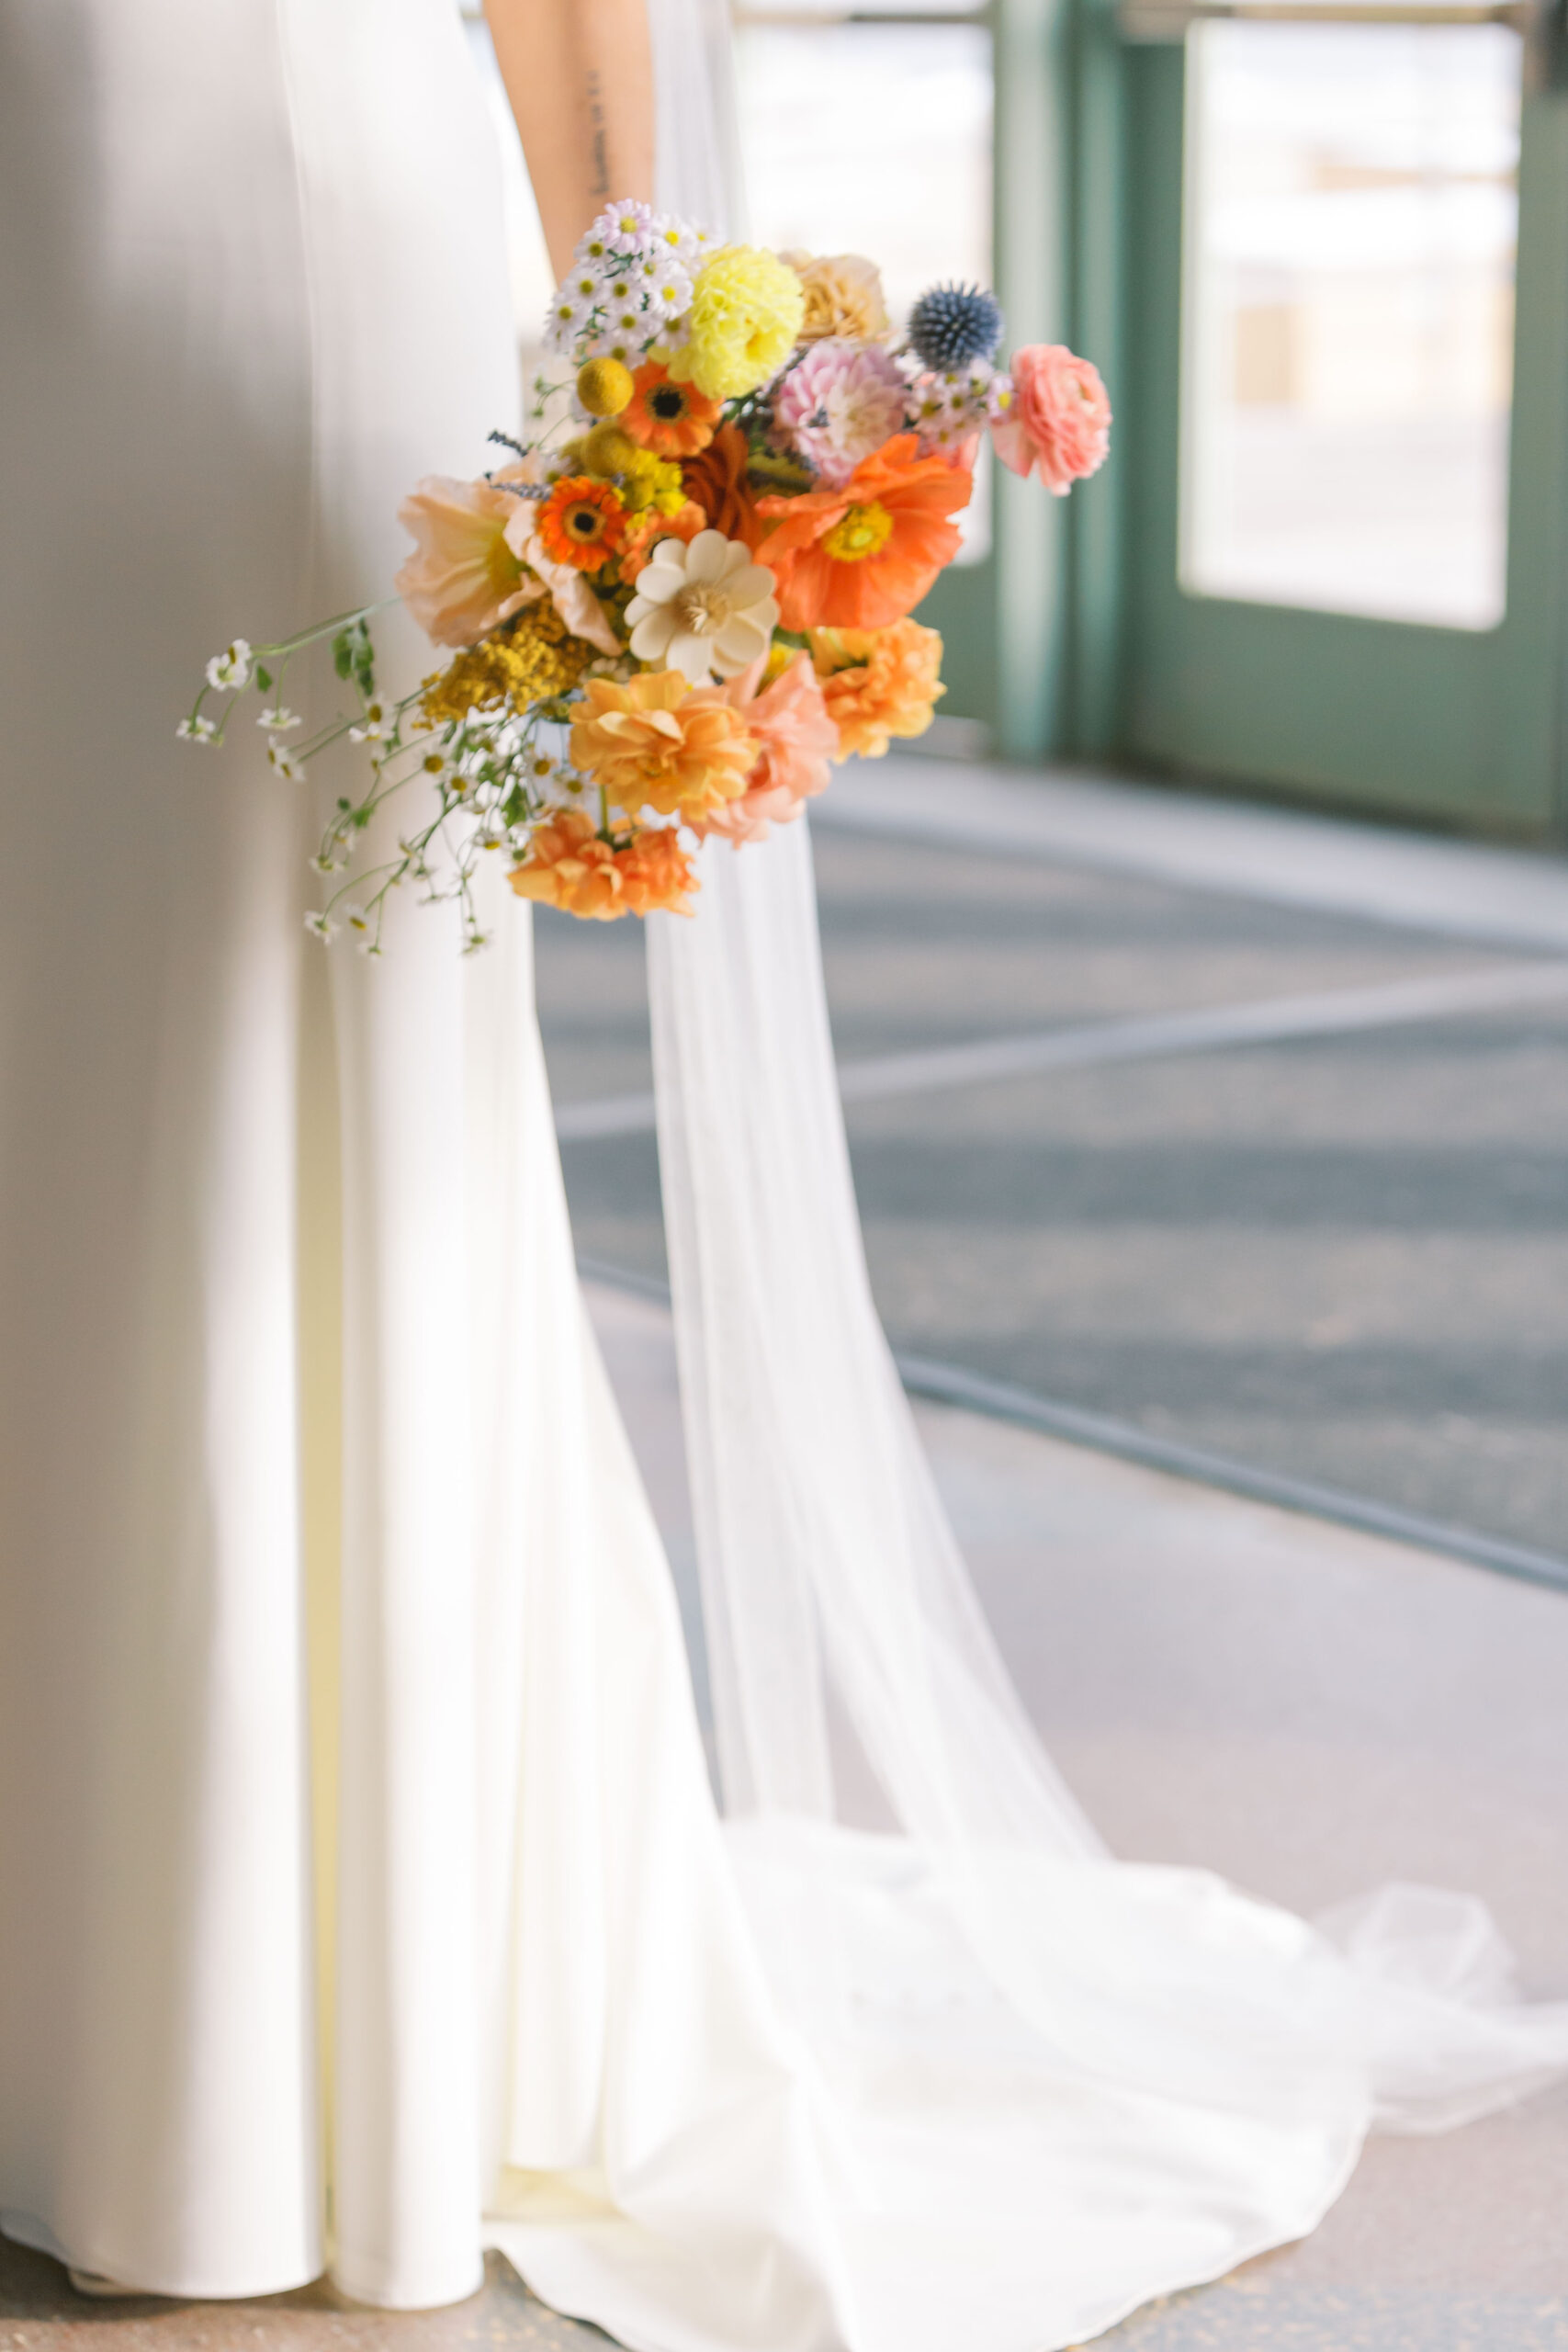 Bold Blooms, Colorful Wedding Flowers, Colorful Bouquets, Colorful Bridal Bouquet, Colorful Wedding Flowers